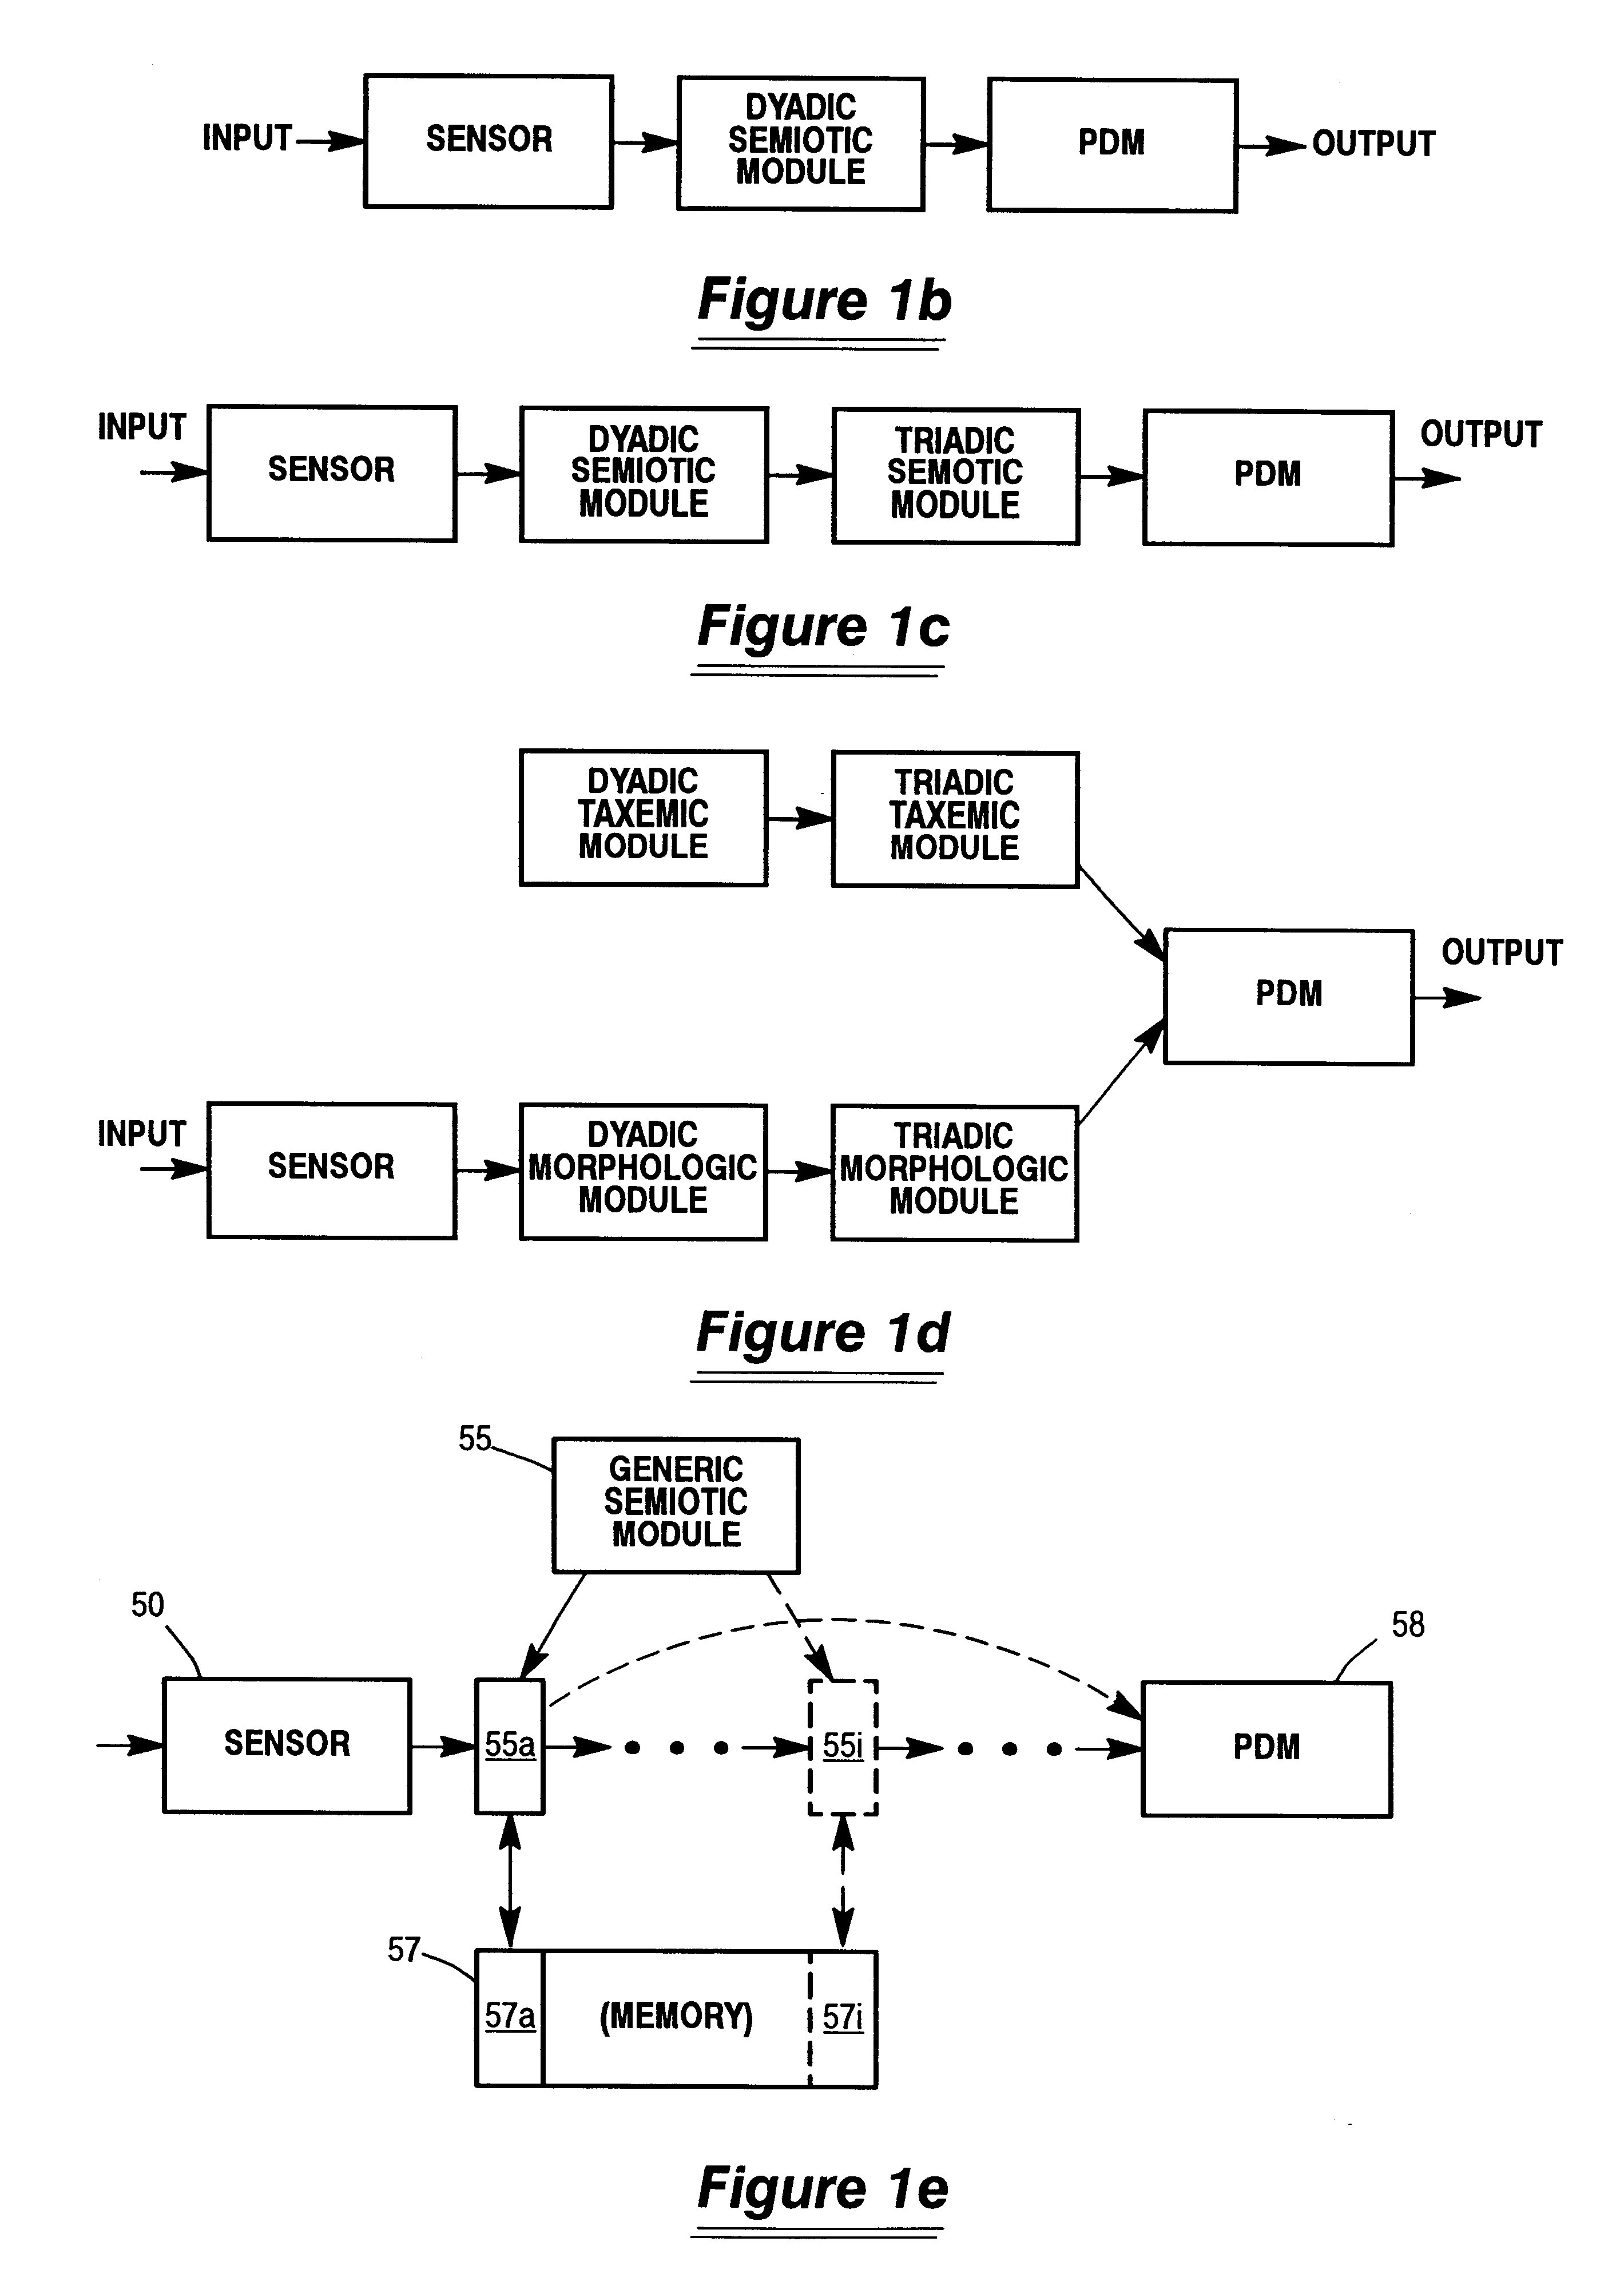 Semiotic decision making system used for responding to natural language queries and other purposes and components therefor